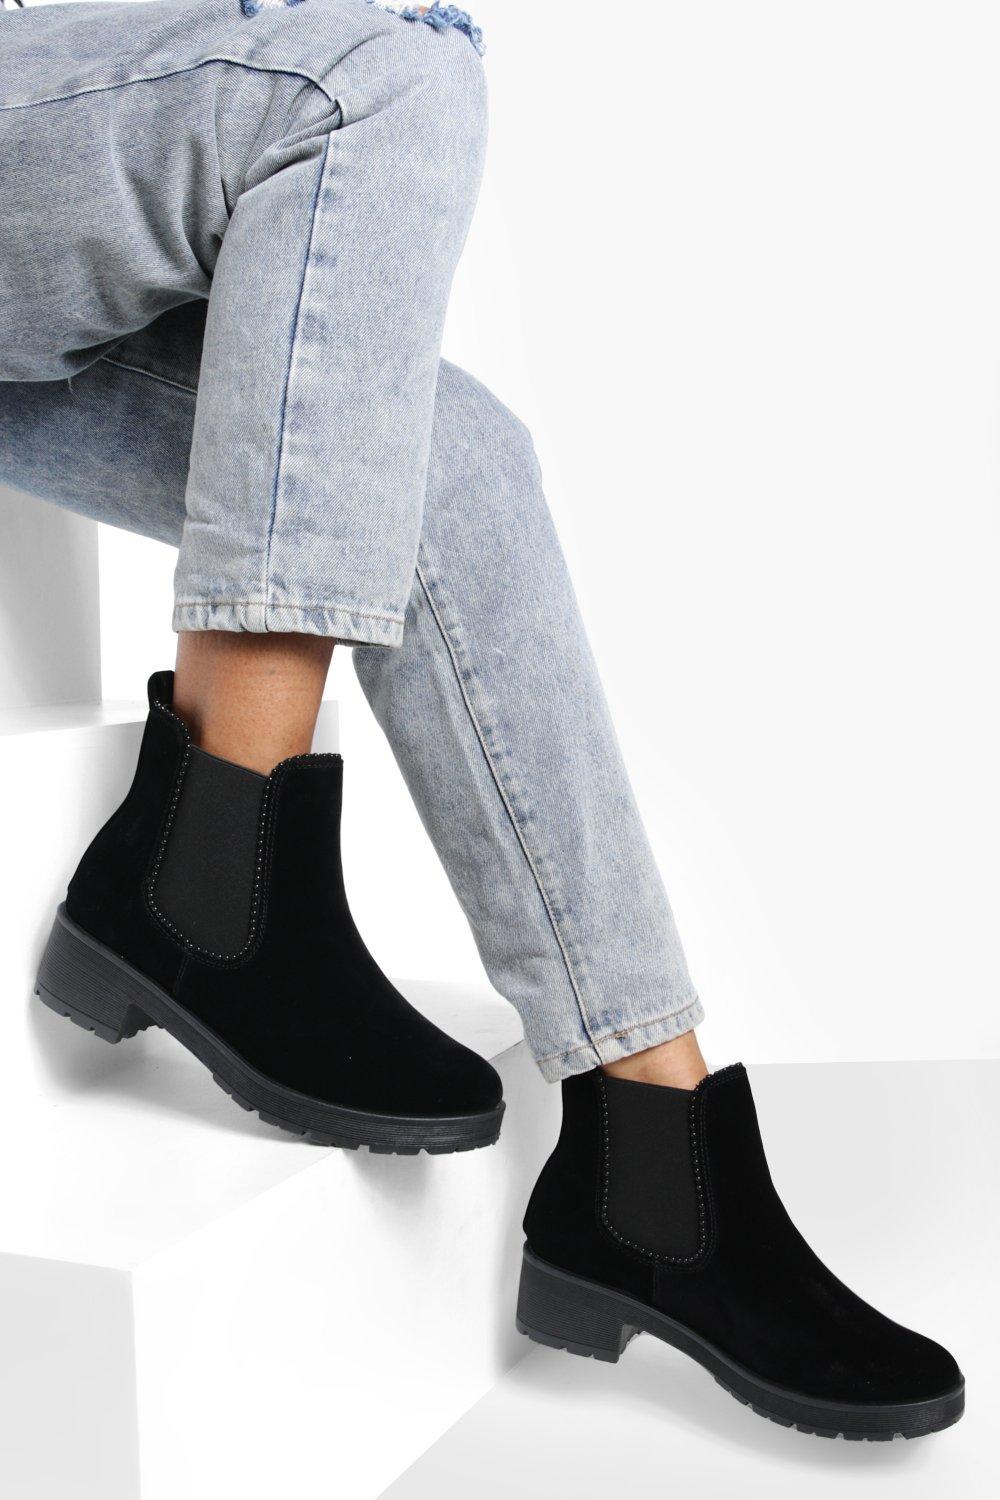 Womens Ribbed Detail Chunky Chelsea Boots - Black - 3, Black